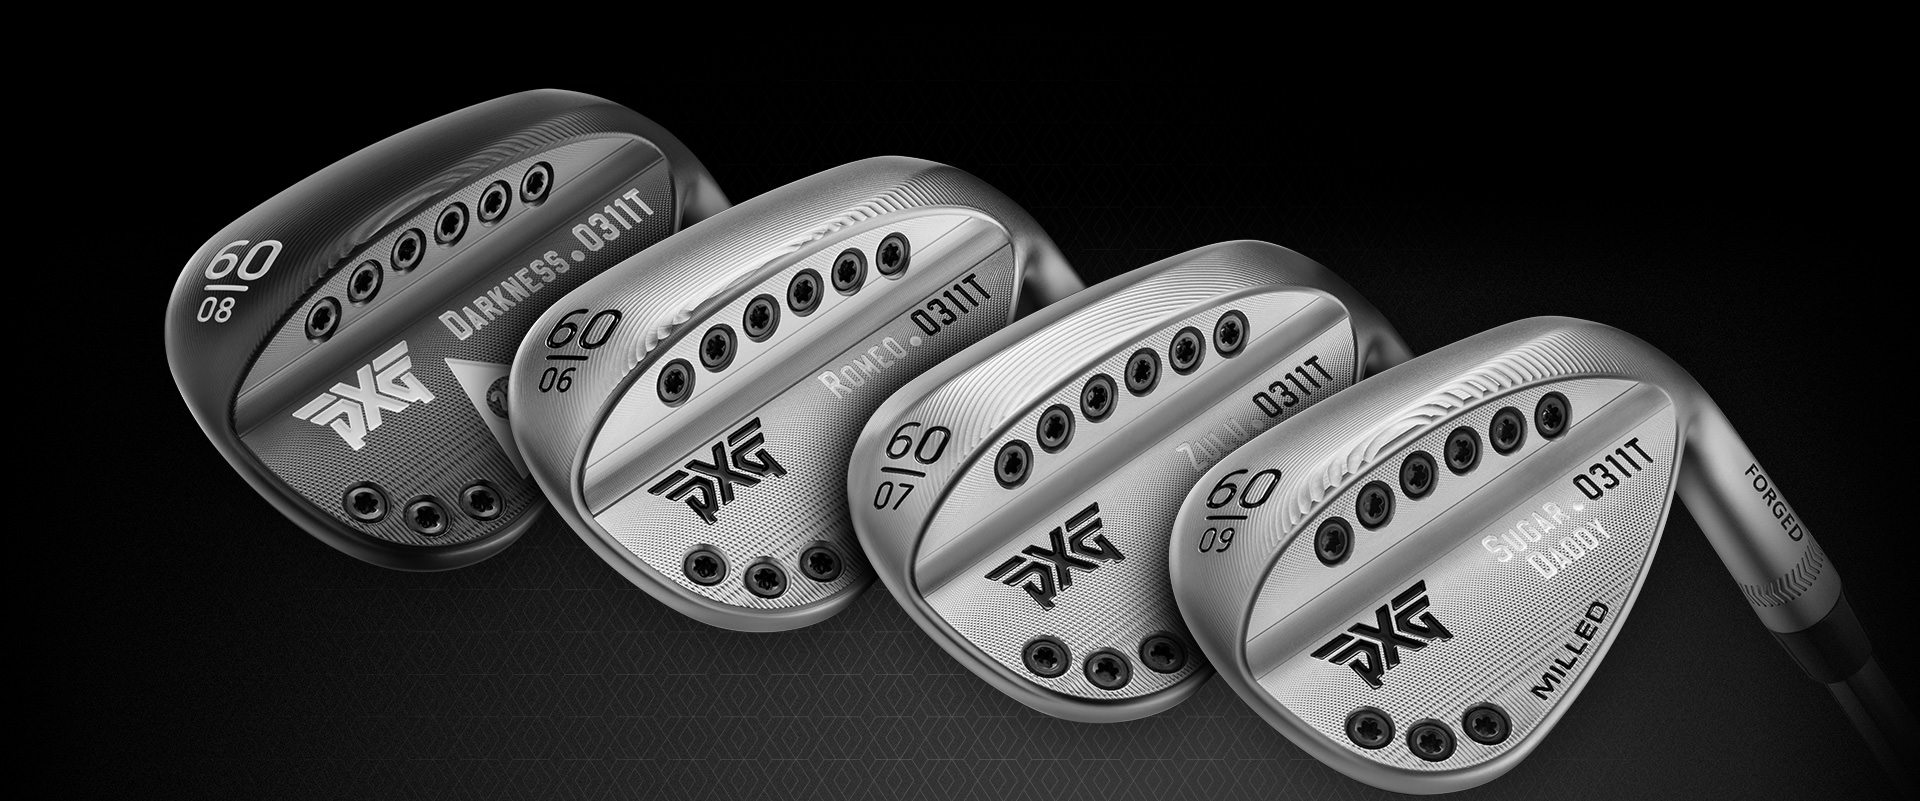 PXG - Parsons Xtreme Golf - Clubs Unlike Any Other